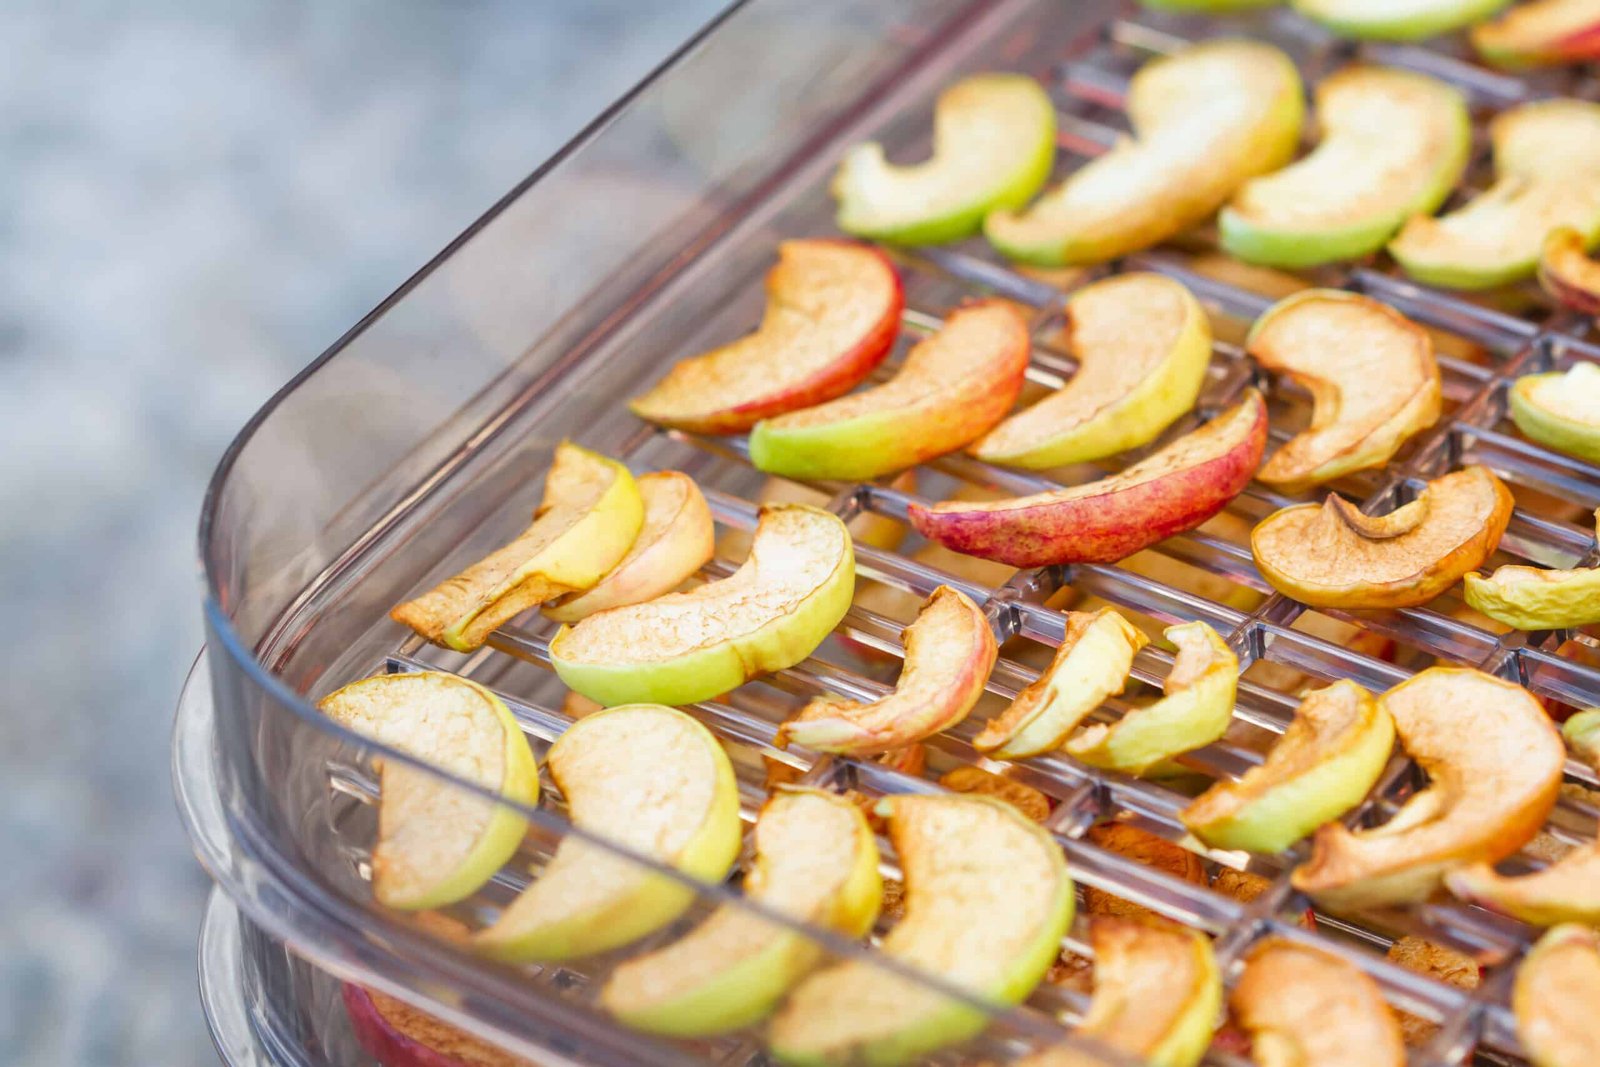 sliced red and green apples lined in dehydrator plastic tray